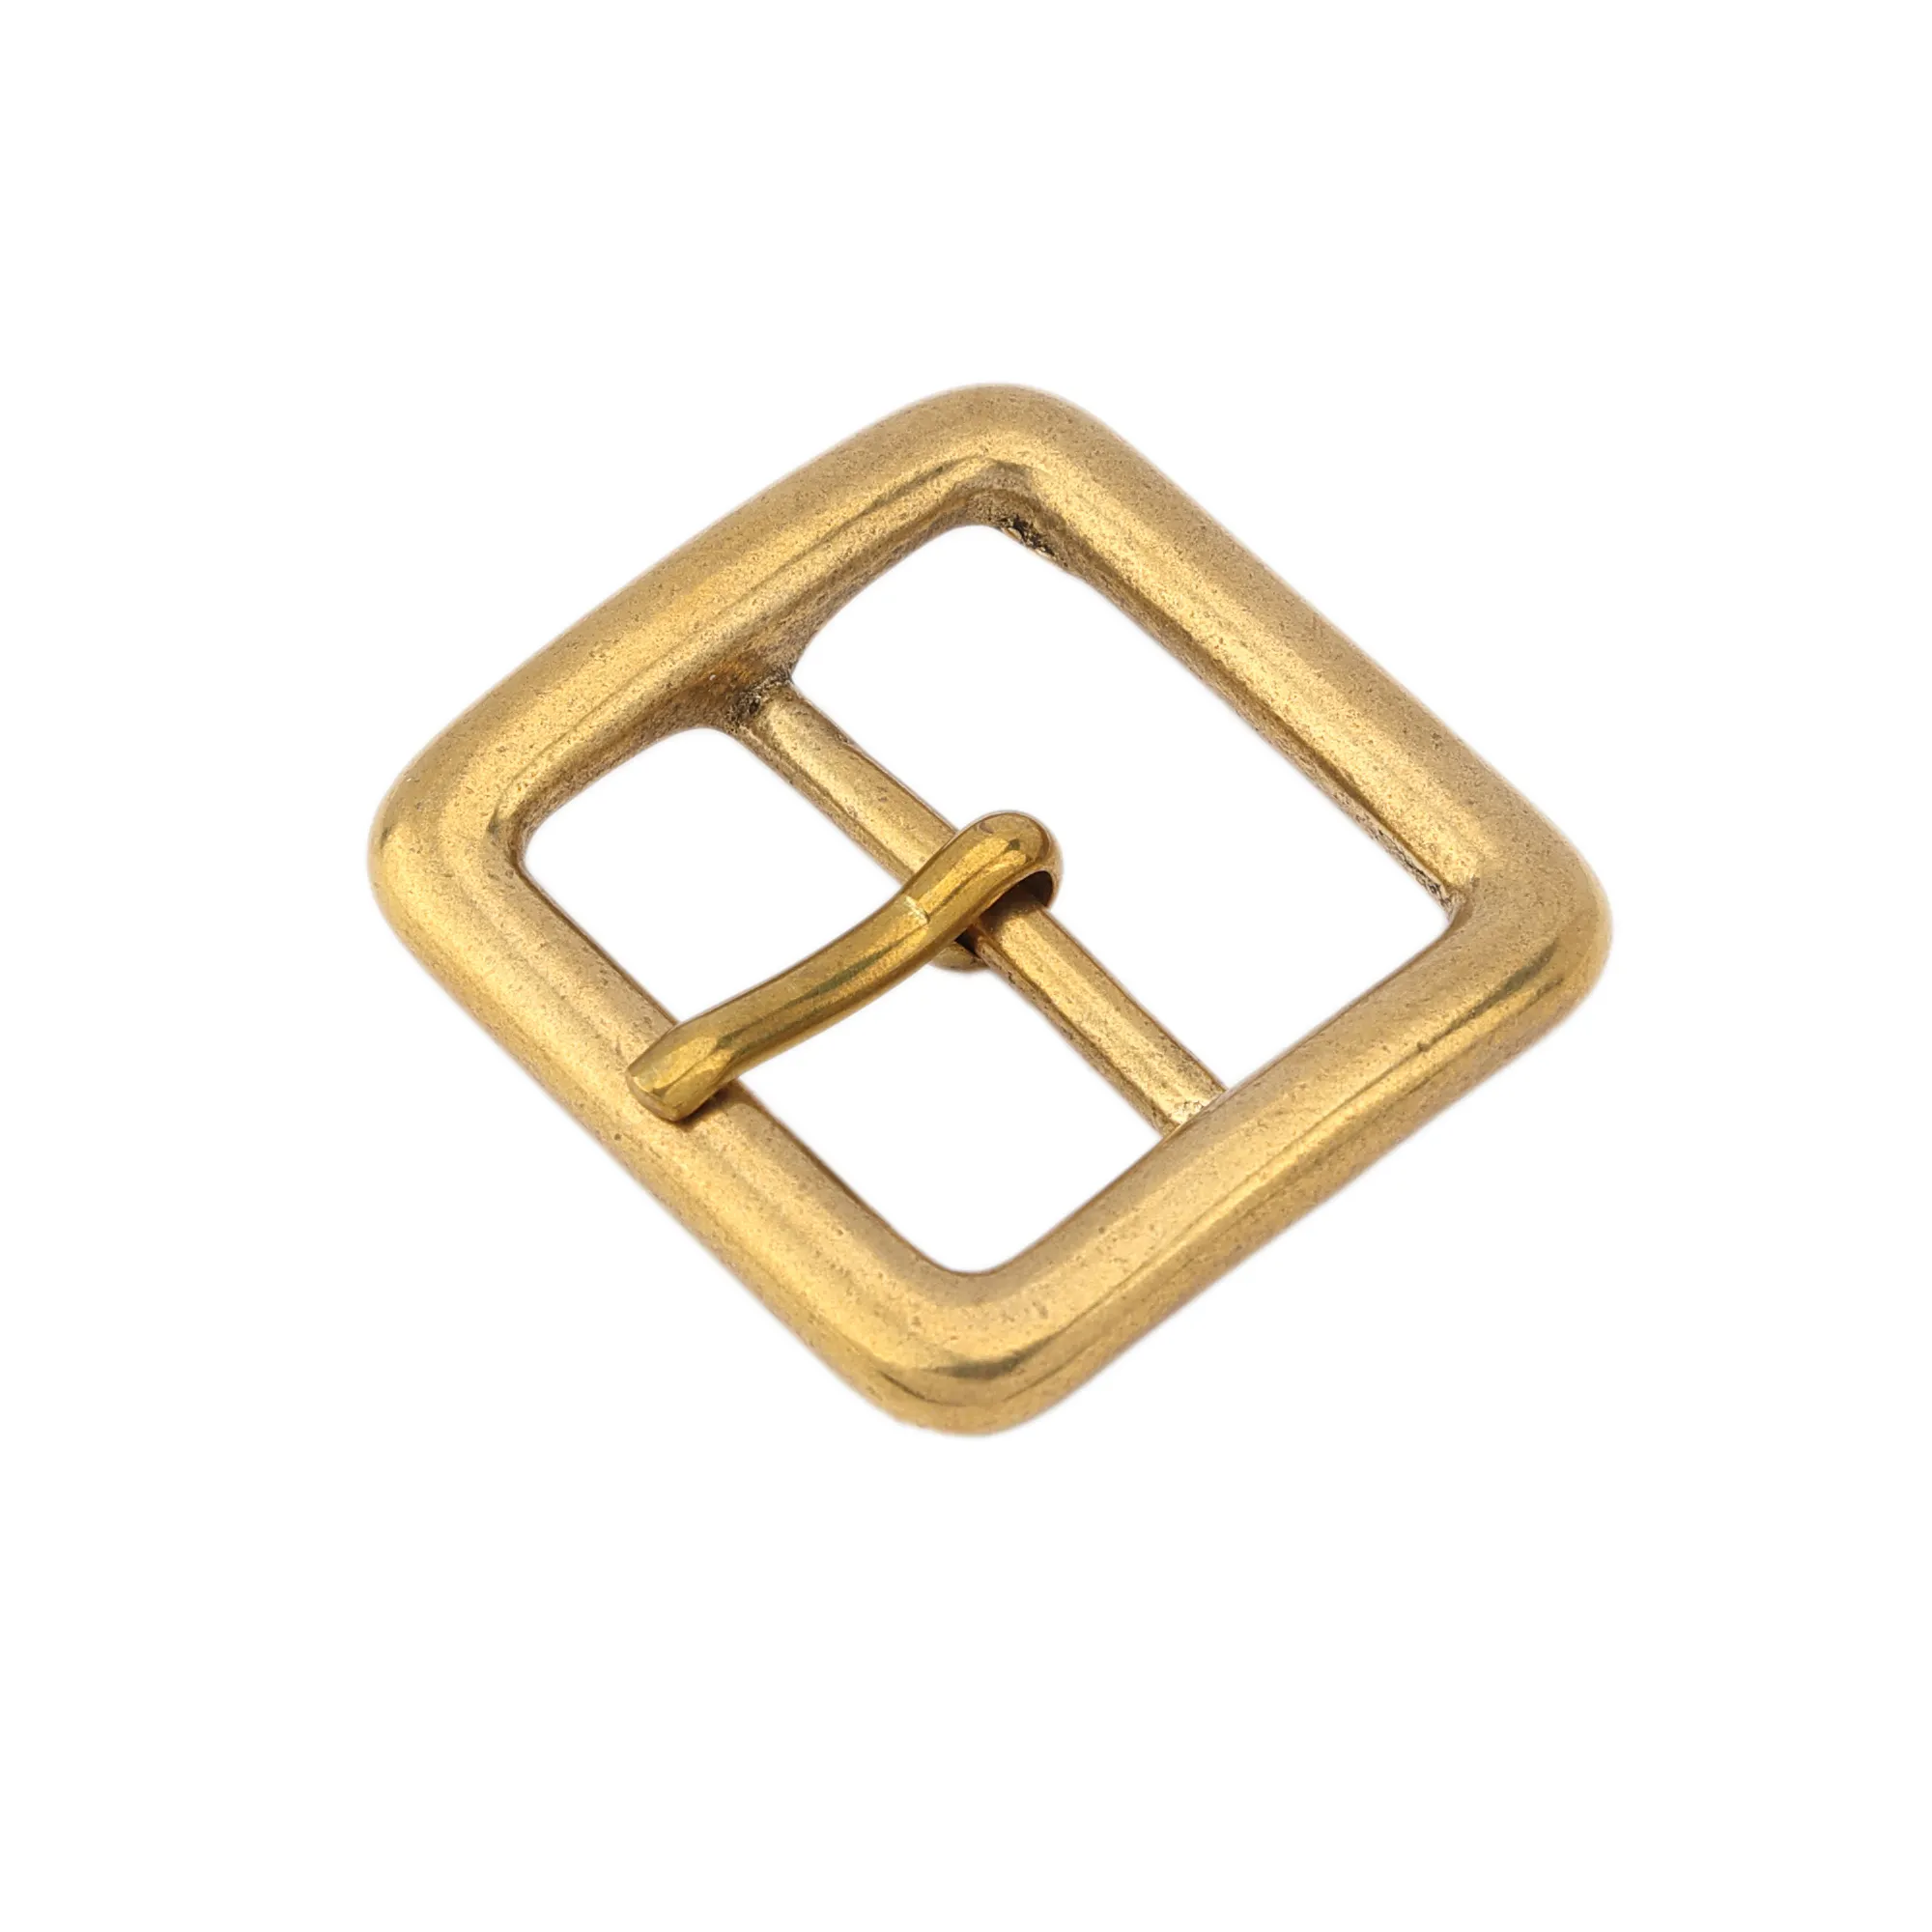 Made in japan solid brass 30mm belt buckles Replacement casting Buckle Square Pin Buckle for belt